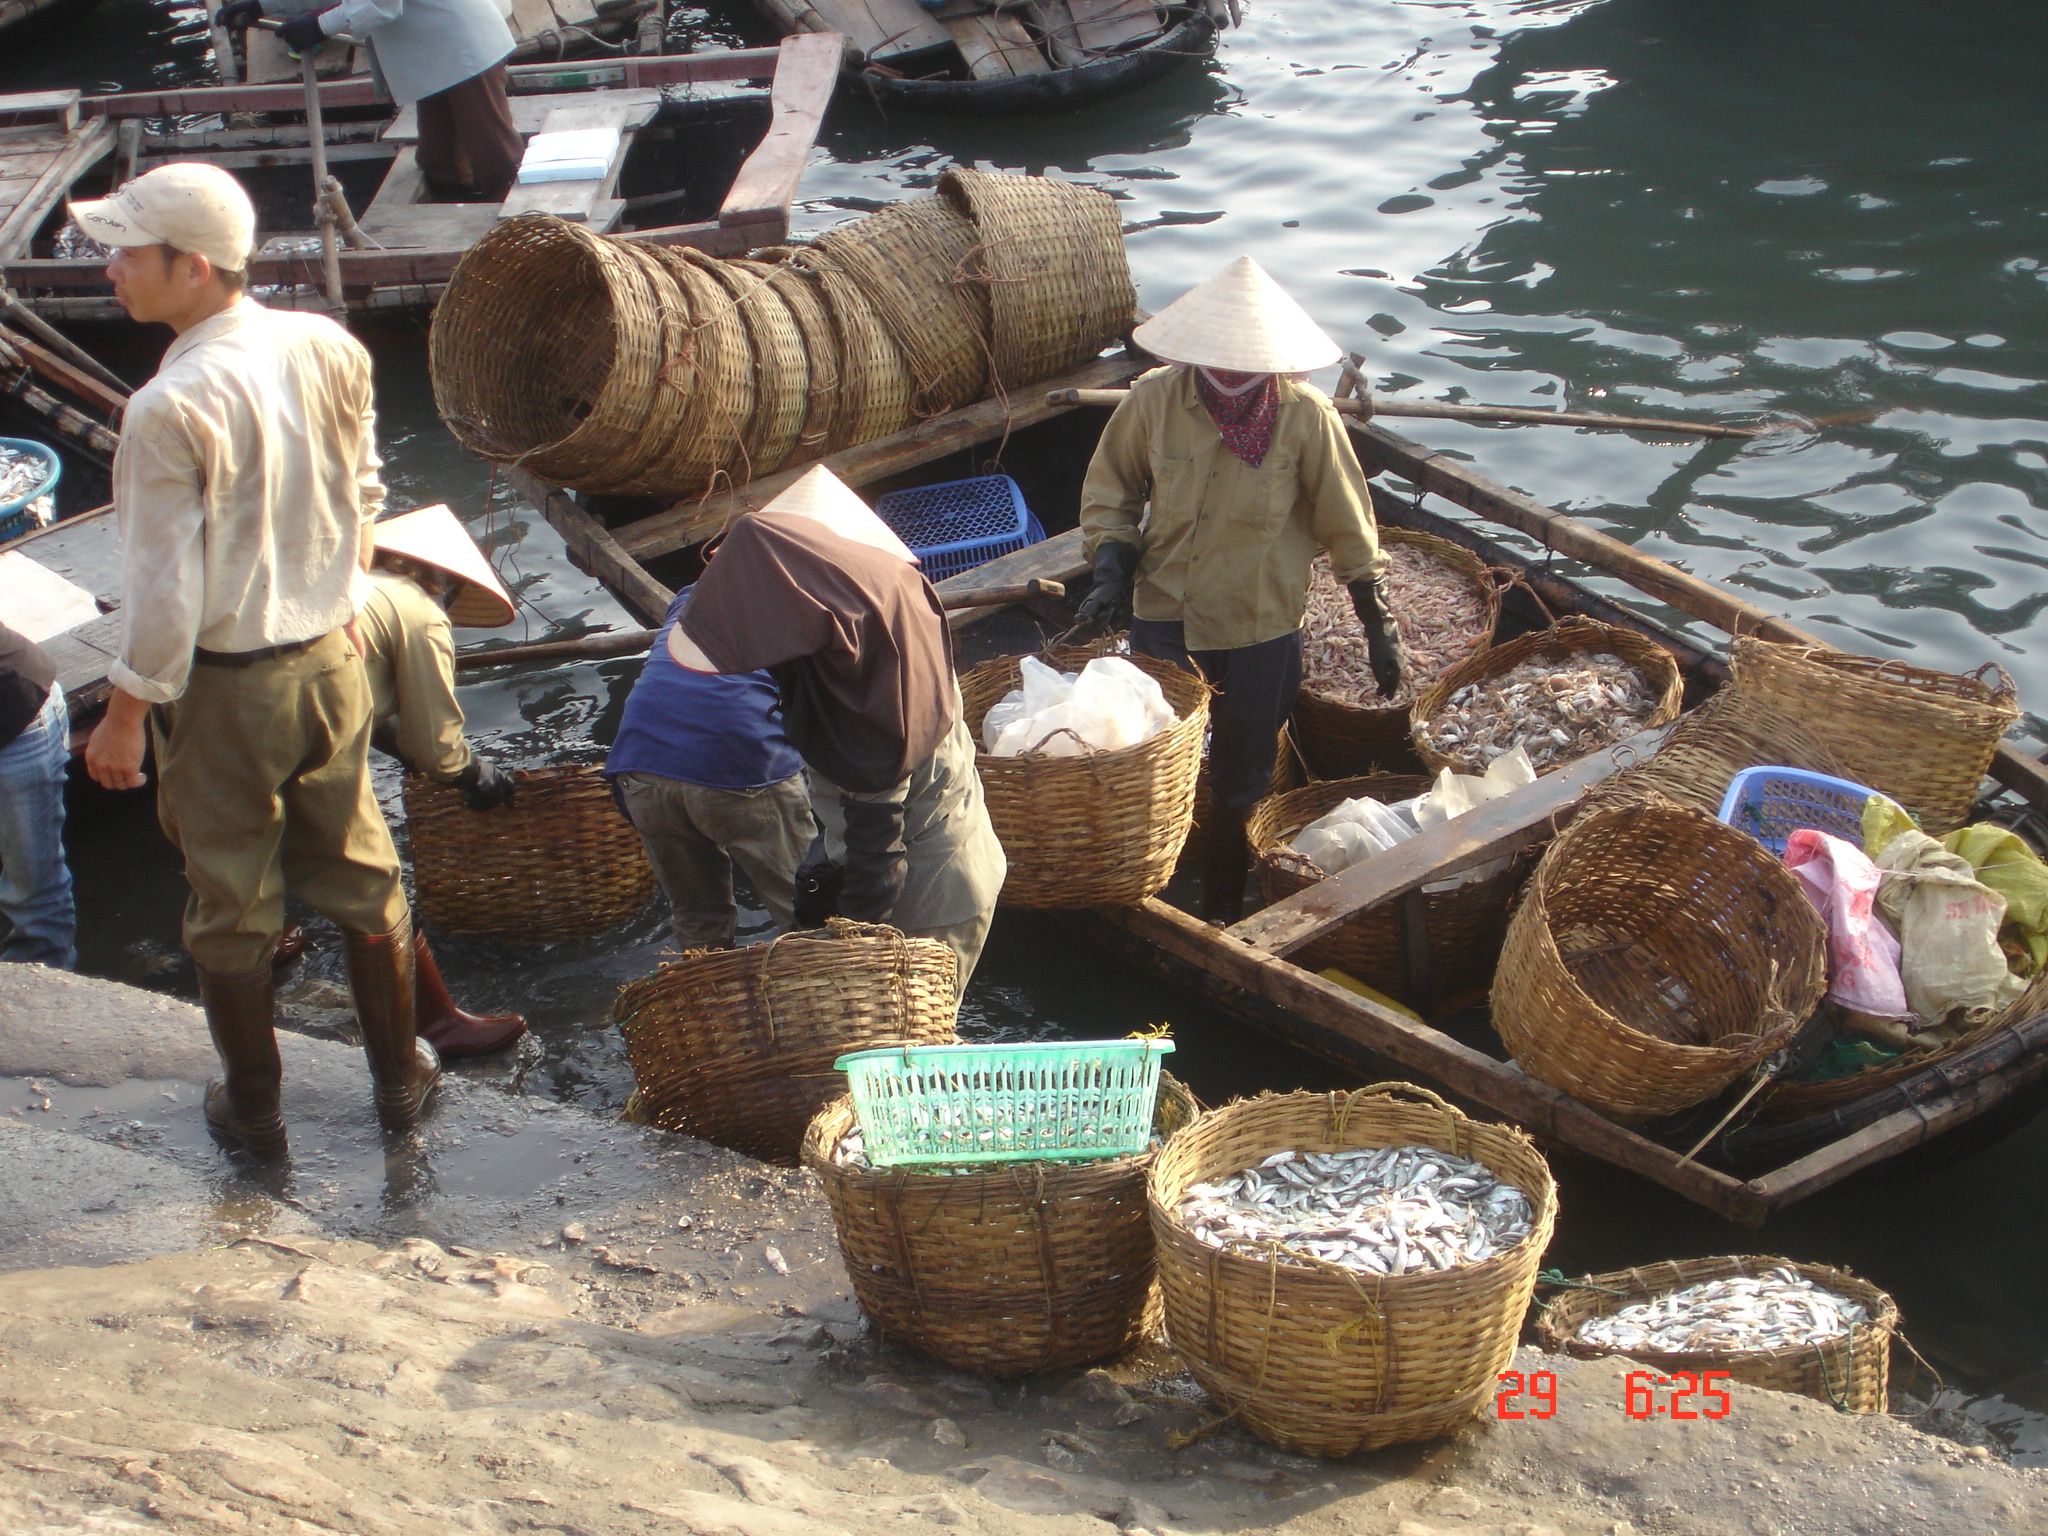 Ha Tinh: More than 1,000 tons of fish landed in the first quarter